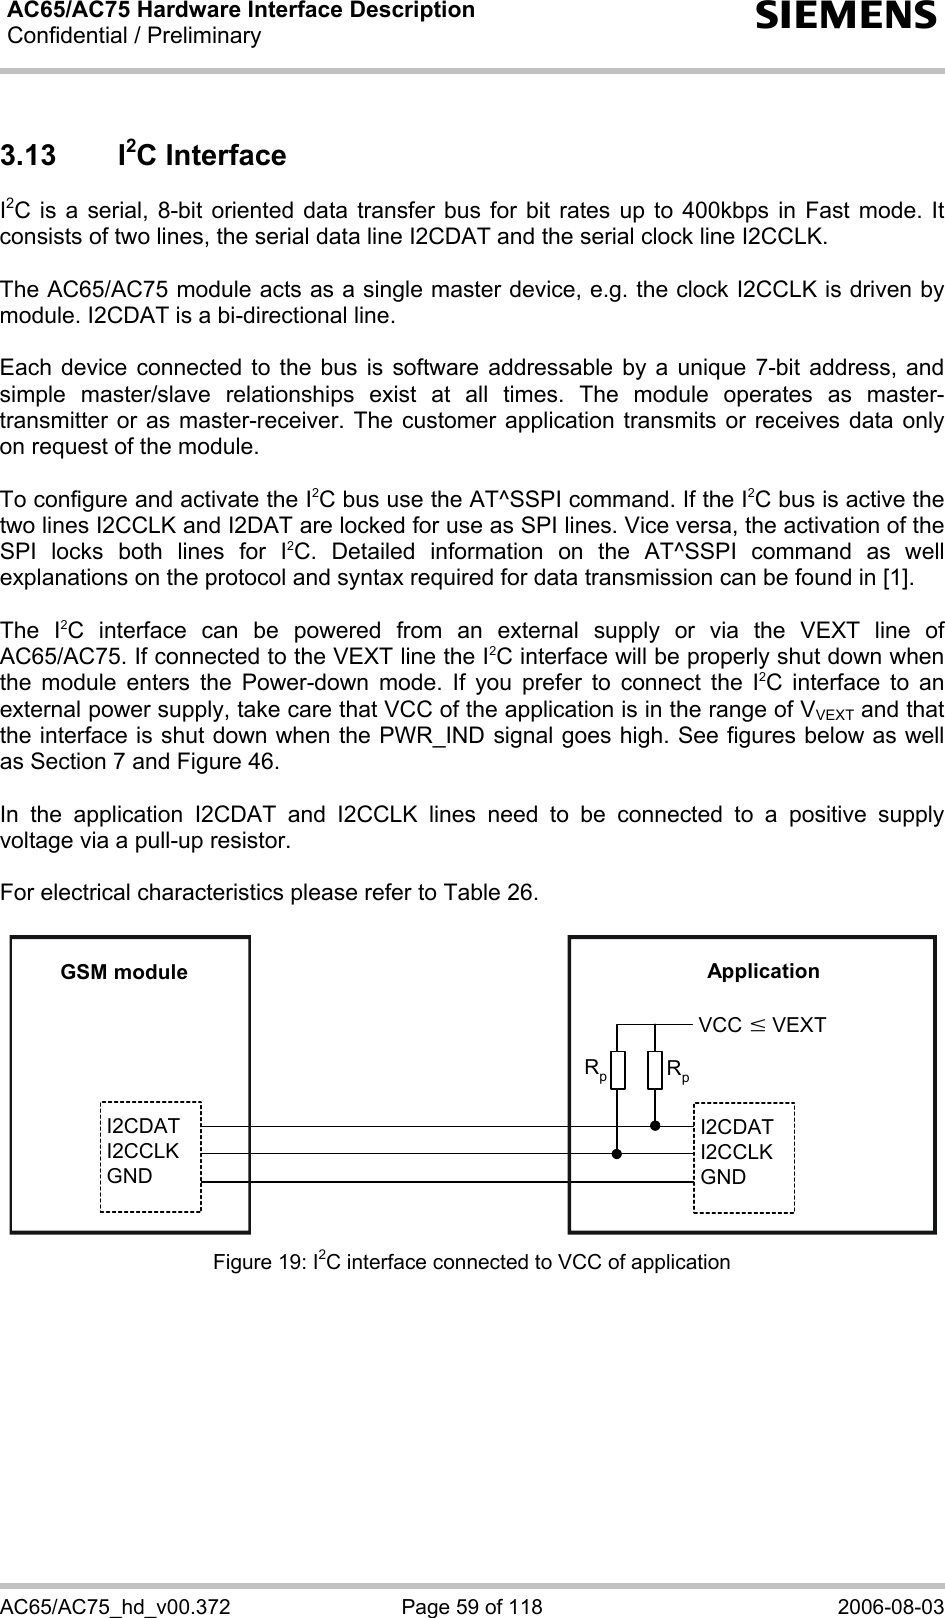 AC65/AC75 Hardware Interface Description Confidential / Preliminary   s AC65/AC75_hd_v00.372  Page 59 of 118  2006-08-03 3.13 I2C Interface I2C is a serial, 8-bit oriented data transfer bus for bit rates up to 400kbps in Fast mode. It consists of two lines, the serial data line I2CDAT and the serial clock line I2CCLK.   The AC65/AC75 module acts as a single master device, e.g. the clock I2CCLK is driven by module. I2CDAT is a bi-directional line.  Each device connected to the bus is software addressable by a unique 7-bit address, and simple master/slave relationships exist at all times. The module operates as master-transmitter or as master-receiver. The customer application transmits or receives data only on request of the module.   To configure and activate the I2C bus use the AT^SSPI command. If the I2C bus is active the two lines I2CCLK and I2DAT are locked for use as SPI lines. Vice versa, the activation of the SPI locks both lines for I2C. Detailed information on the AT^SSPI command as well explanations on the protocol and syntax required for data transmission can be found in [1].  The I2C interface can be powered from an external supply or via the VEXT line of AC65/AC75. If connected to the VEXT line the I2C interface will be properly shut down when the module enters the Power-down mode. If you prefer to connect the I2C interface to an external power supply, take care that VCC of the application is in the range of VVEXT and that the interface is shut down when the PWR_IND signal goes high. See figures below as well as Section 7 and Figure 46.  In the application I2CDAT and I2CCLK lines need to be connected to a positive supply voltage via a pull-up resistor.   For electrical characteristics please refer to Table 26.  GSM moduleI2CDATI2CCLKGNDI2CDATI2CCLKGNDApplicationVCCRpRpwVEXT Figure 19: I2C interface connected to VCC of application  